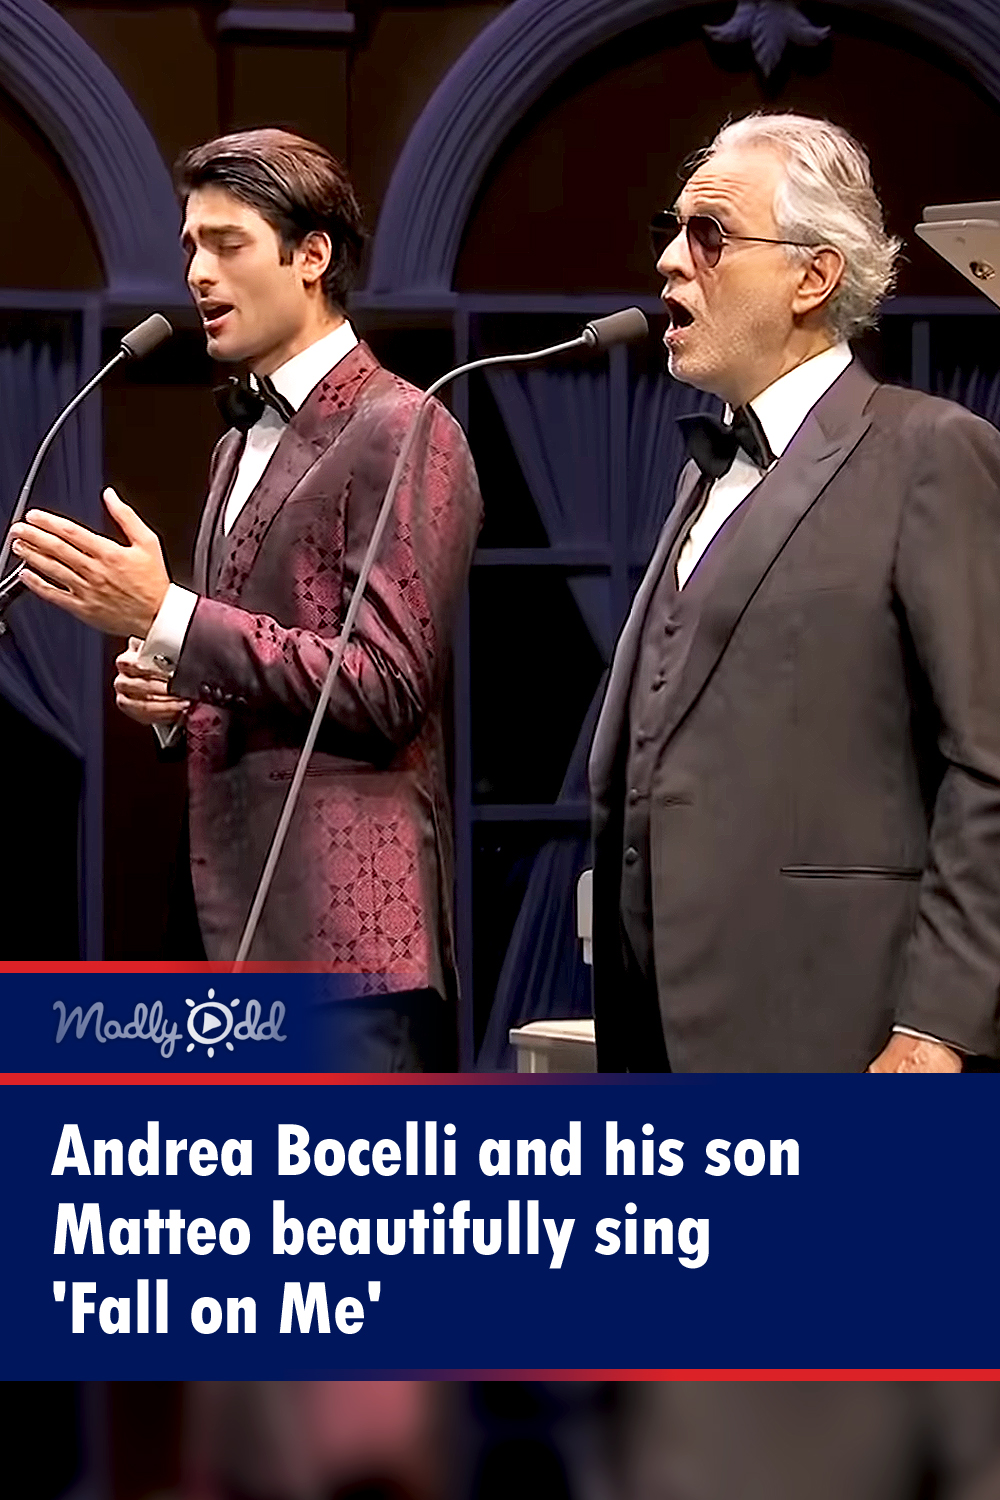 Andrea Bocelli and Matteo Bocelli beautifully sing \'Fall on Me\'